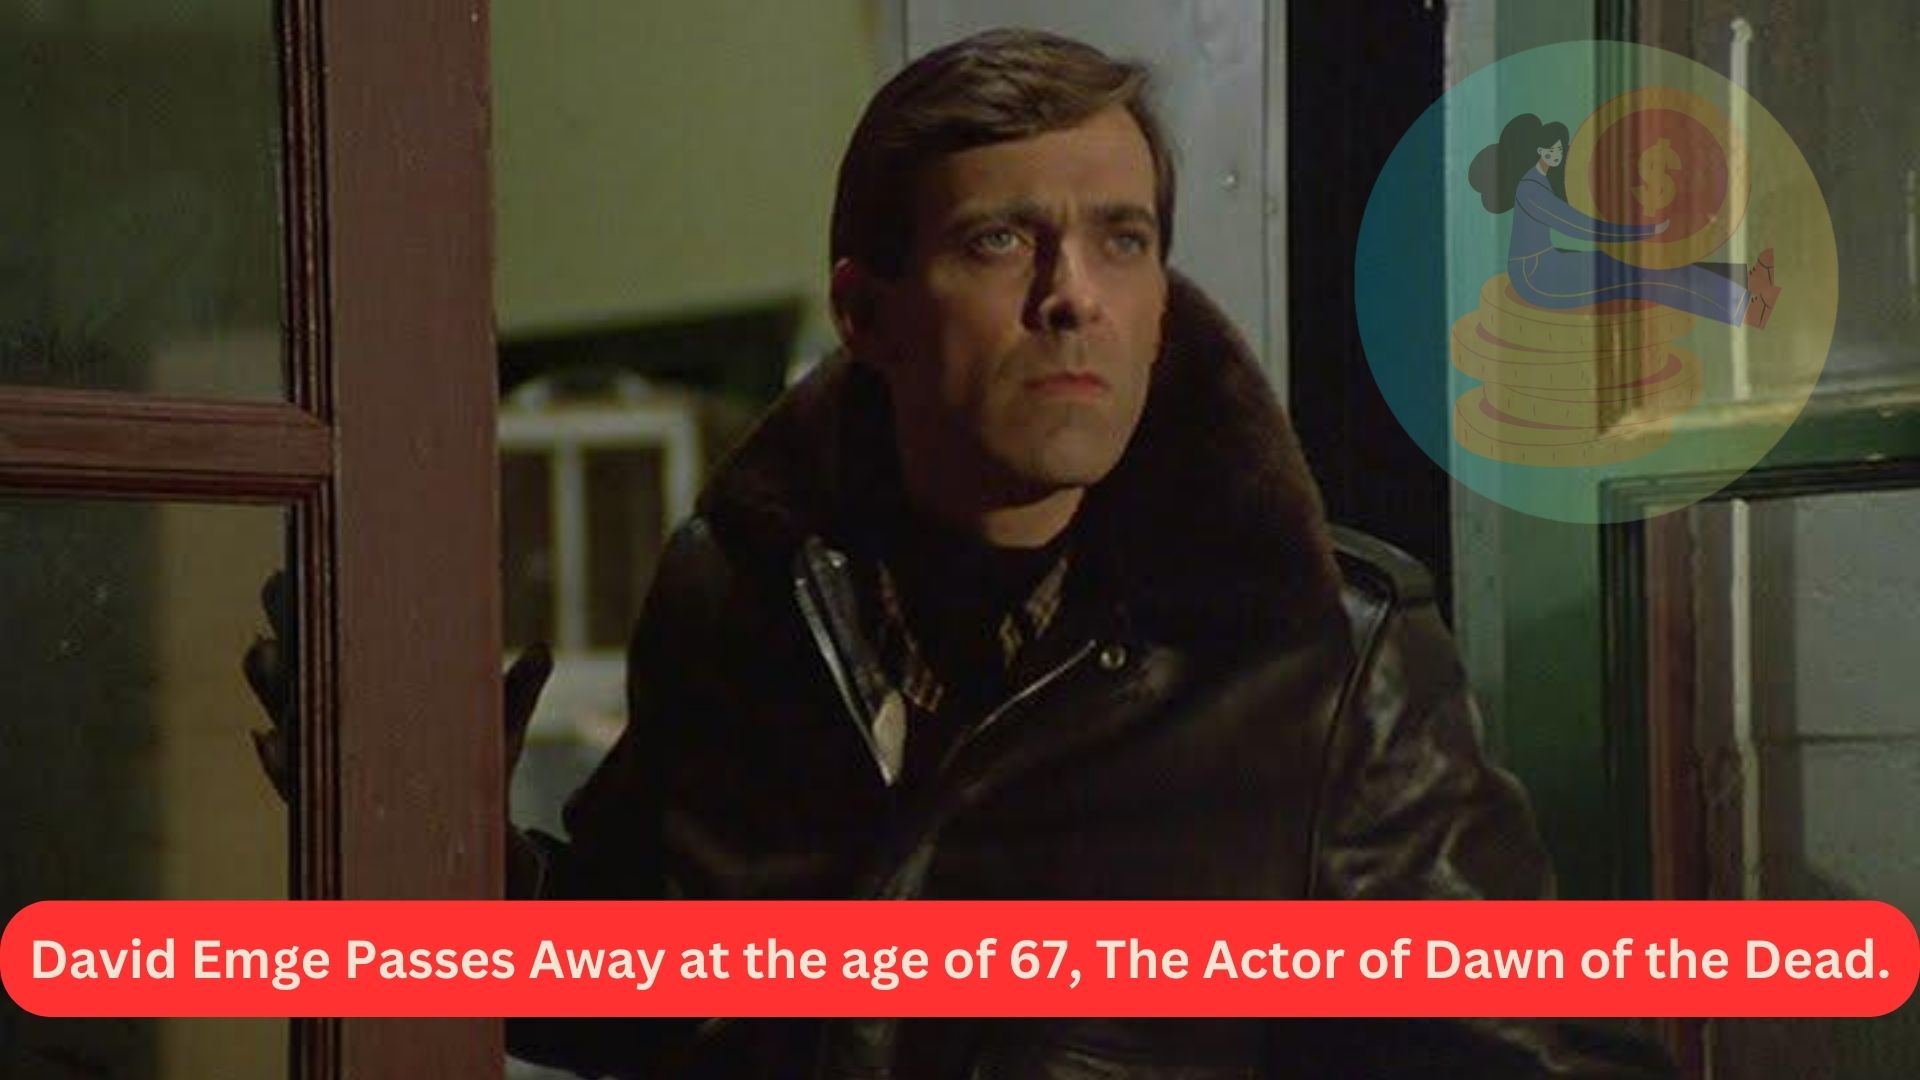 David Emge Passes Away at the age of 67, The Actor of Dawn of the Dead.